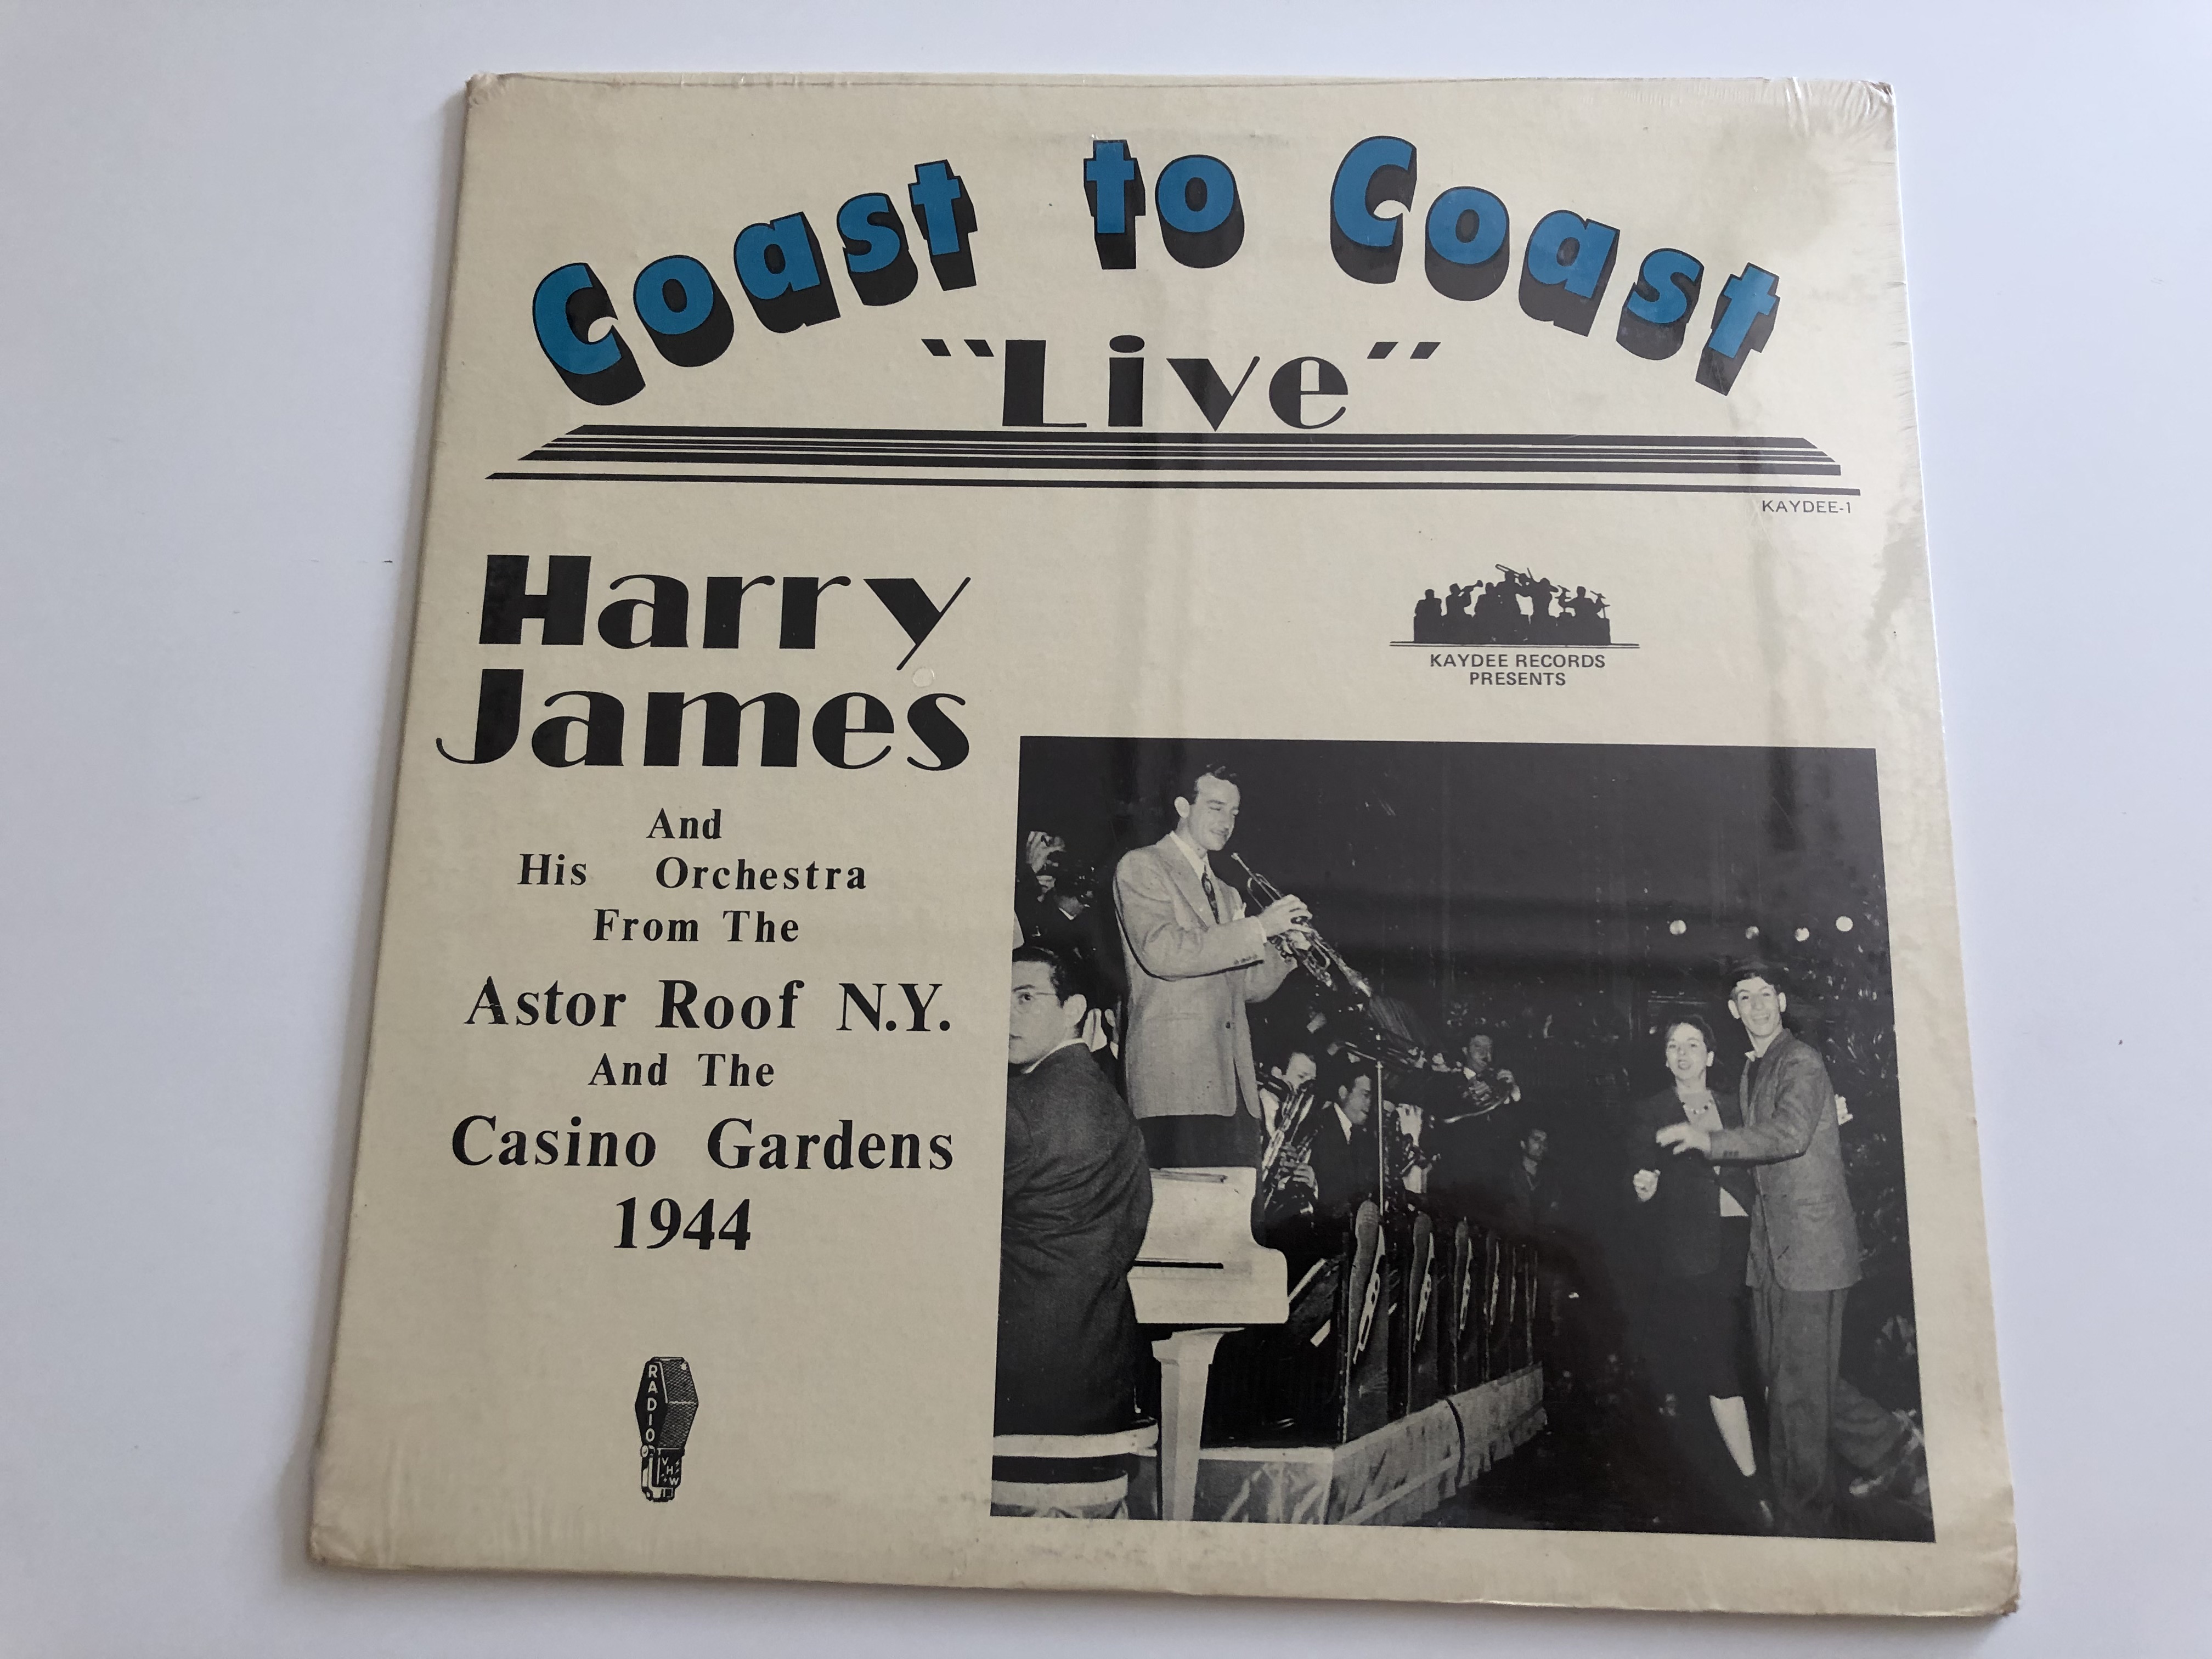 coast-to-coast-live-harry-james-and-his-orchestra-from-the-astor-roof-n.y.-and-the-casino-gardens-1944-kaydee-records-lp-kd-1-1-.jpg